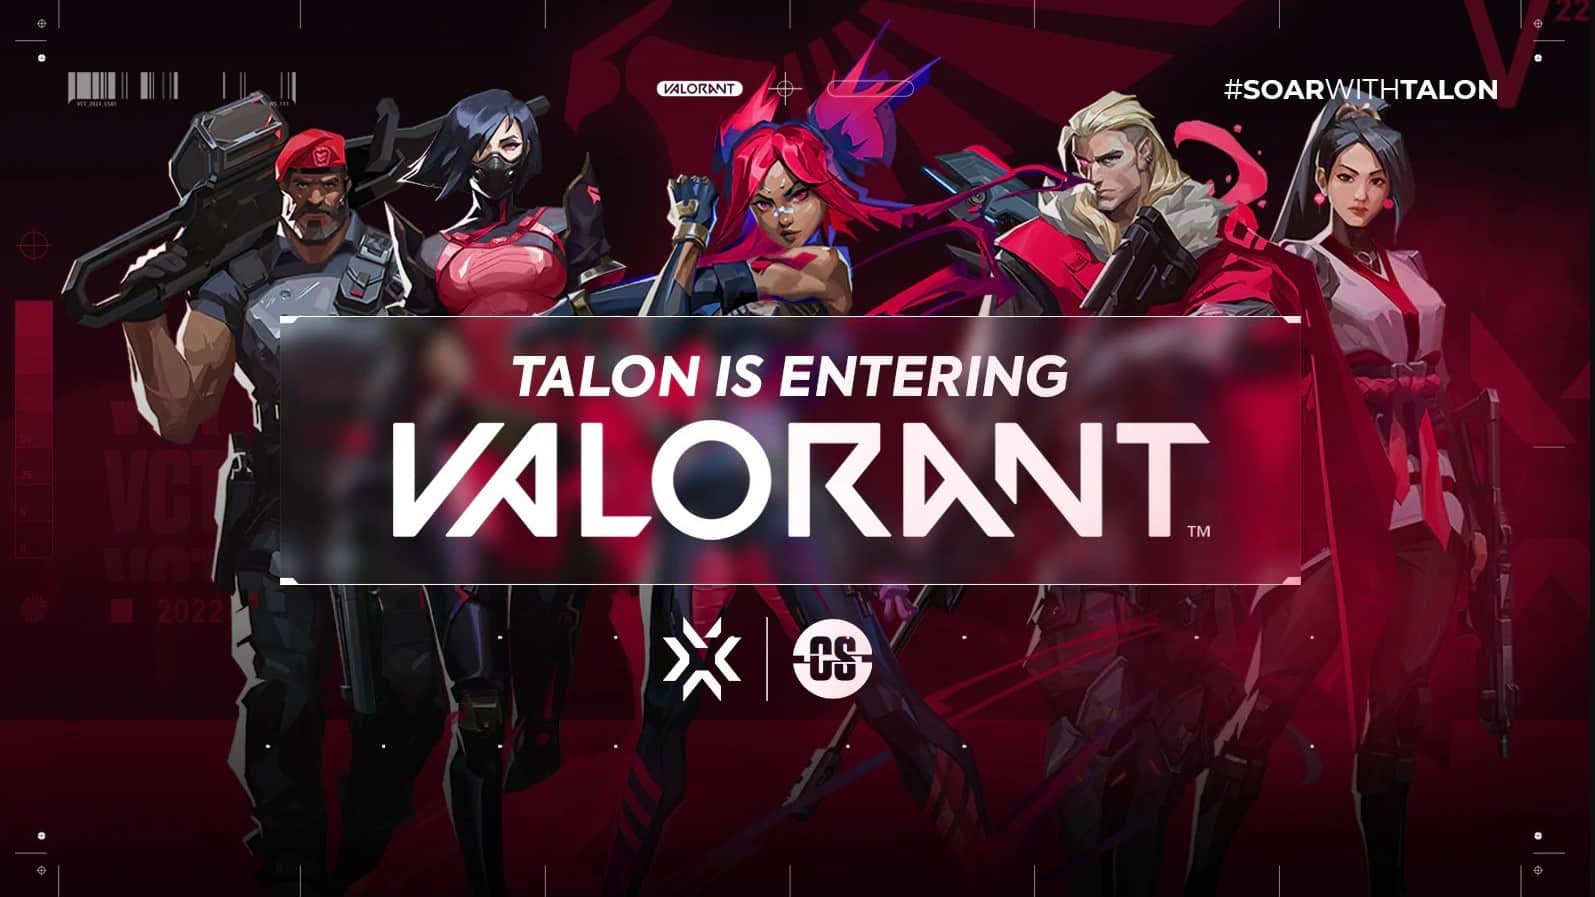 PSG Talon graphic with Valorant characters to announce its entrance into the esport